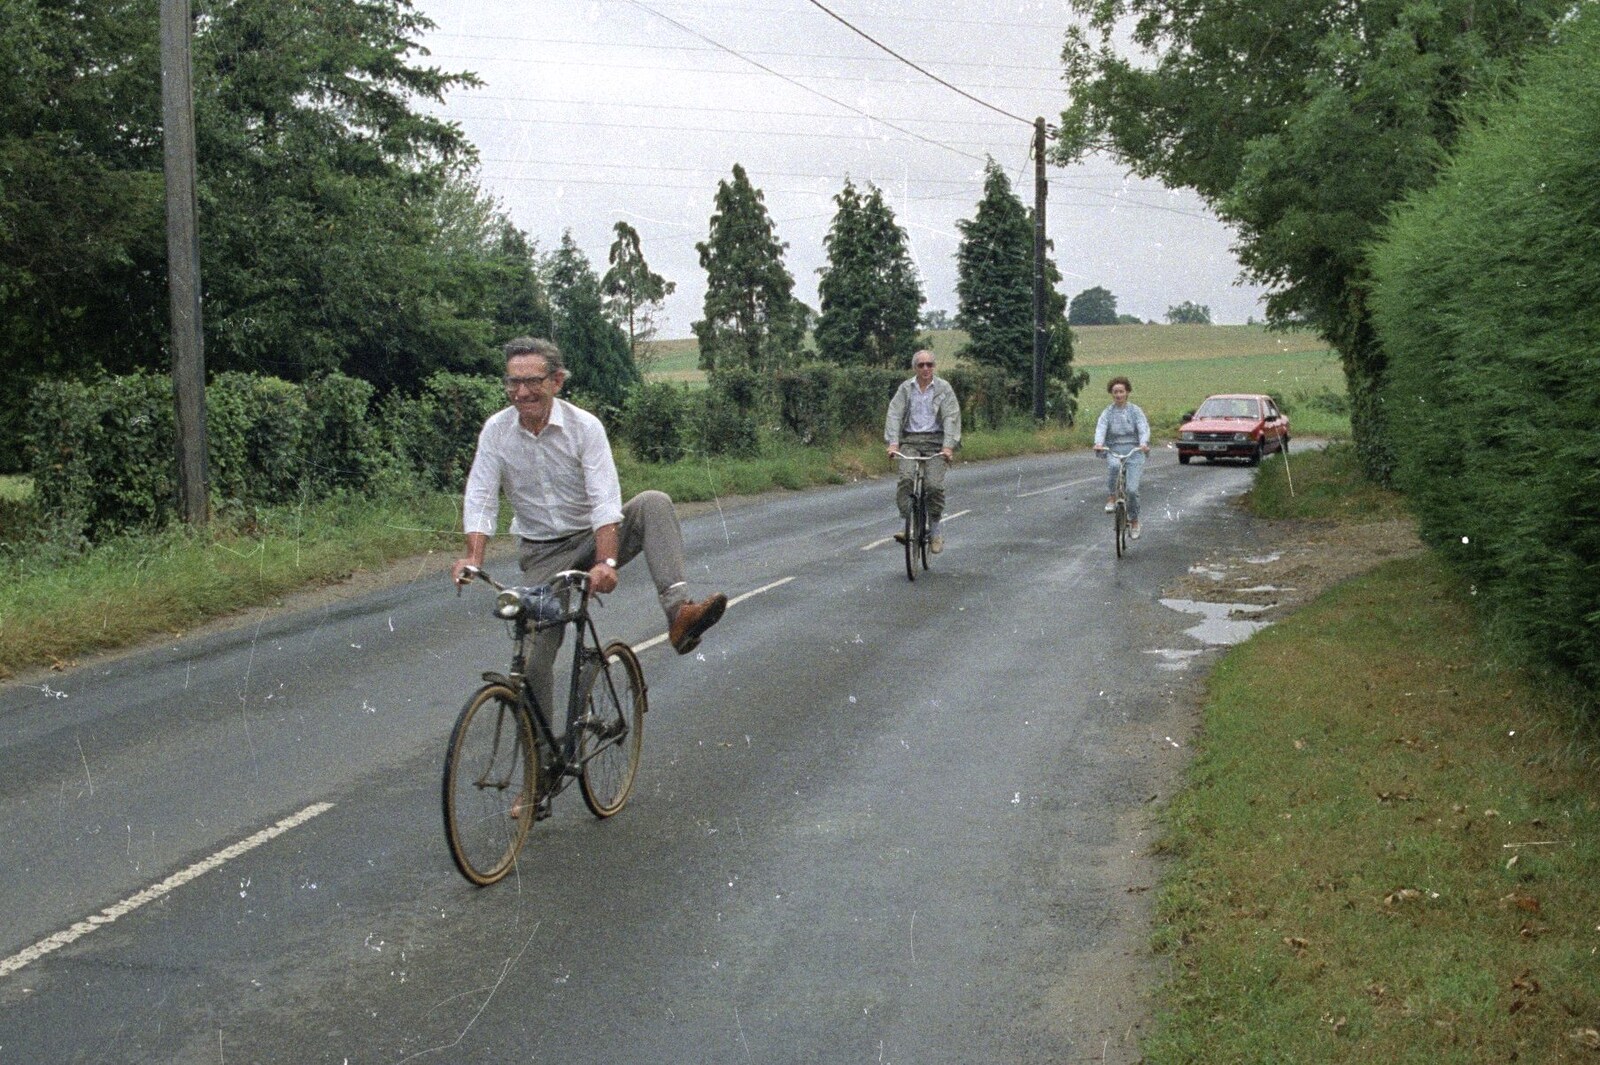 Derek goes for a bit of bicycle acrobatics from A Bike Ride to Redgrave, Suffolk - 11th August 1990